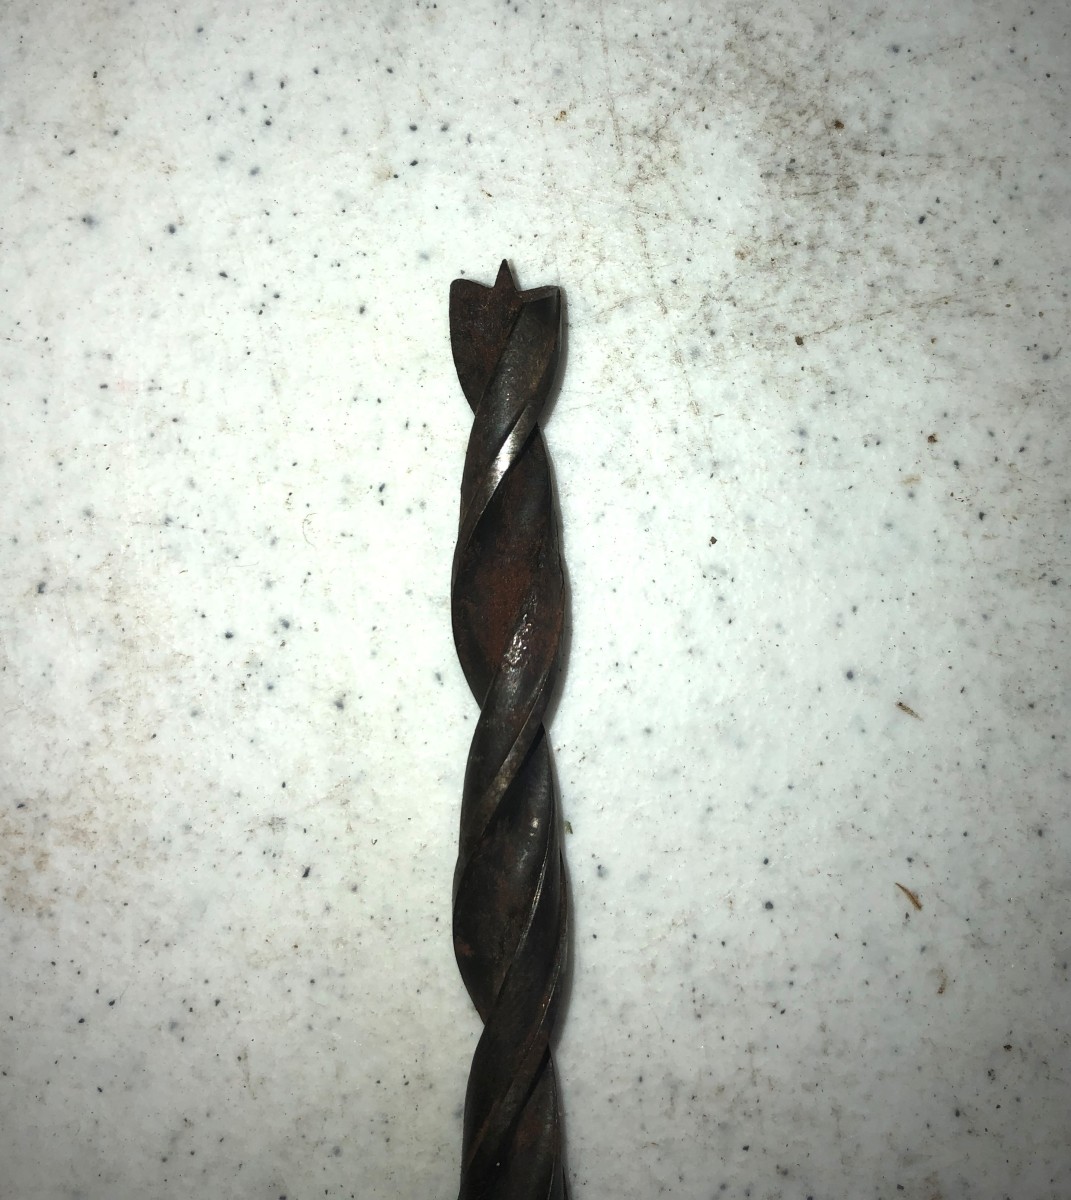 A brad point drill bit designed for soft woods. Notice the rounded spurs.